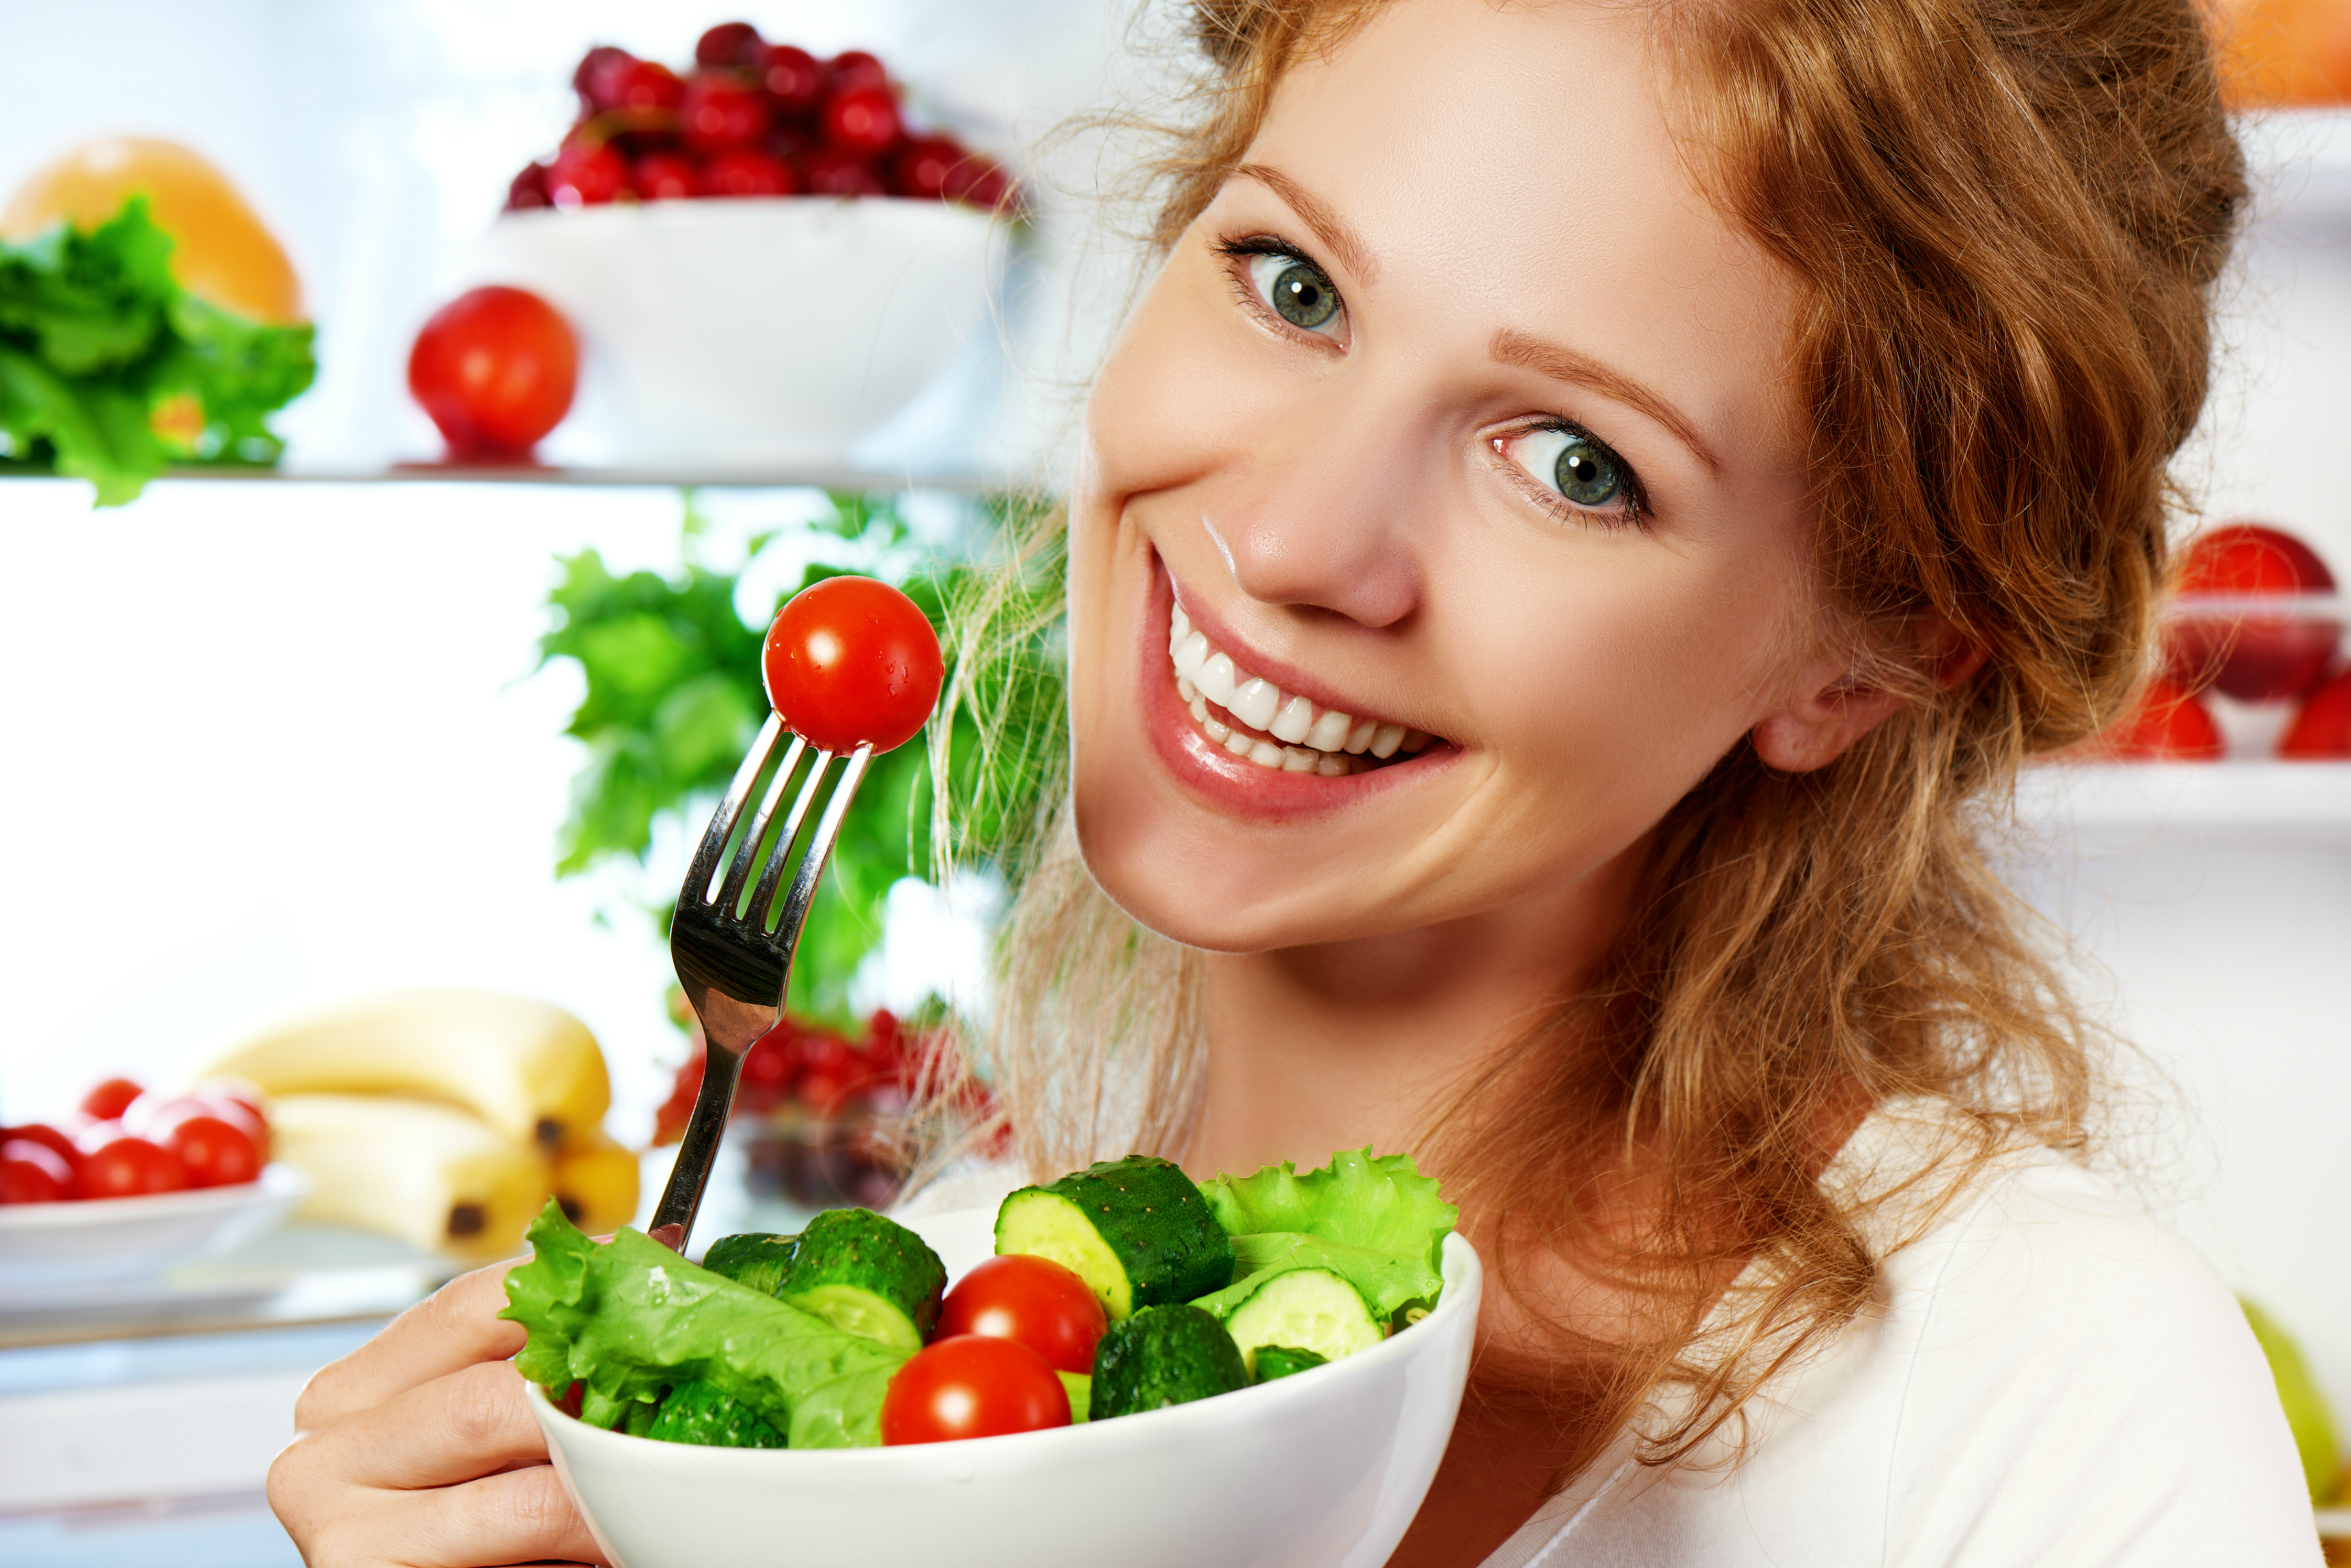 girl with a plate of salad